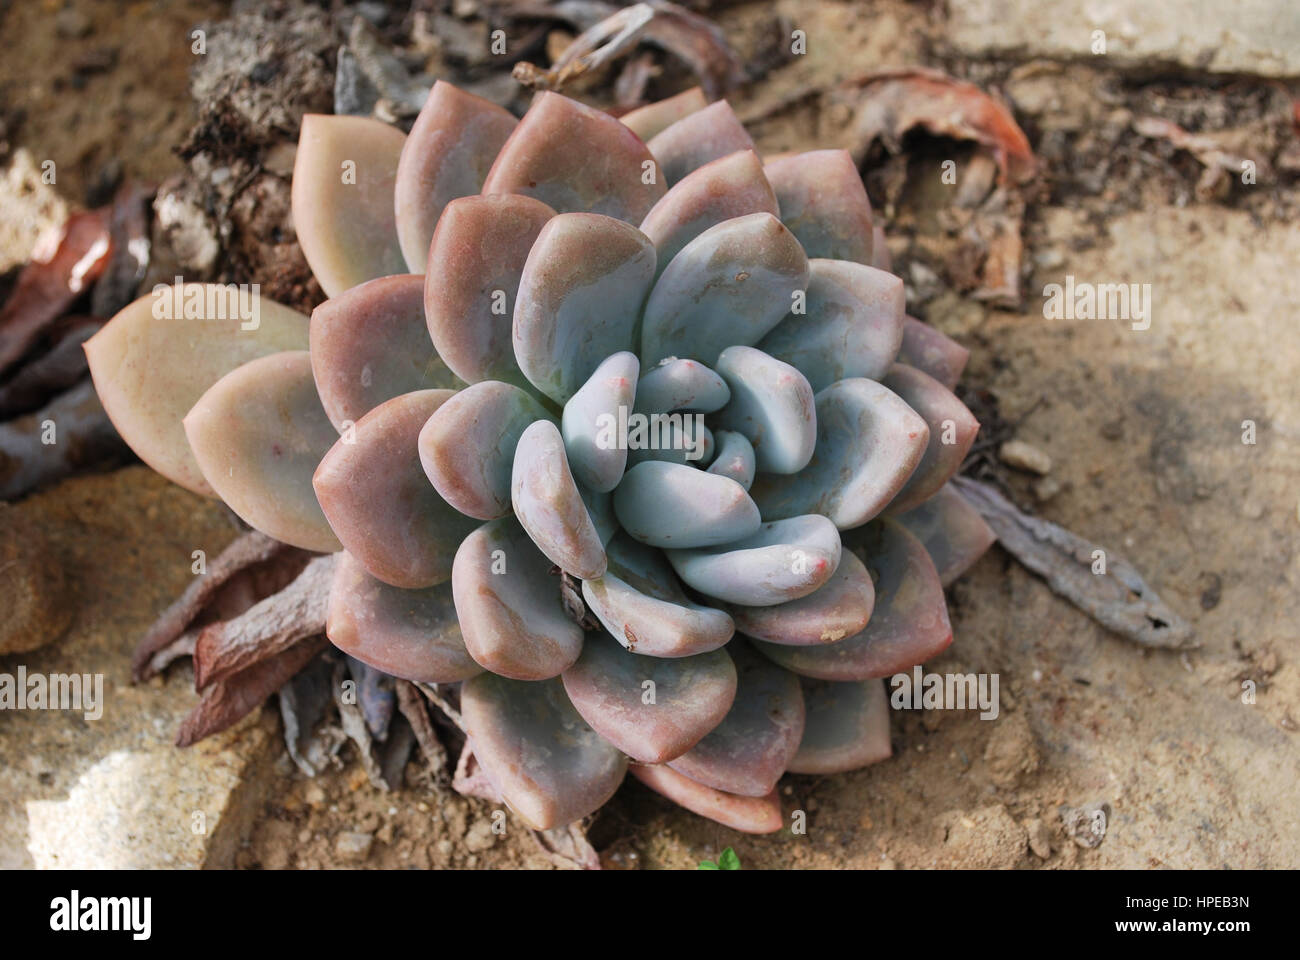 Dudleya caespitosa is a decorative succulent plant known by several common names, including Sealettuce, Sand lettuce, and Coast dudleya. Stock Photo